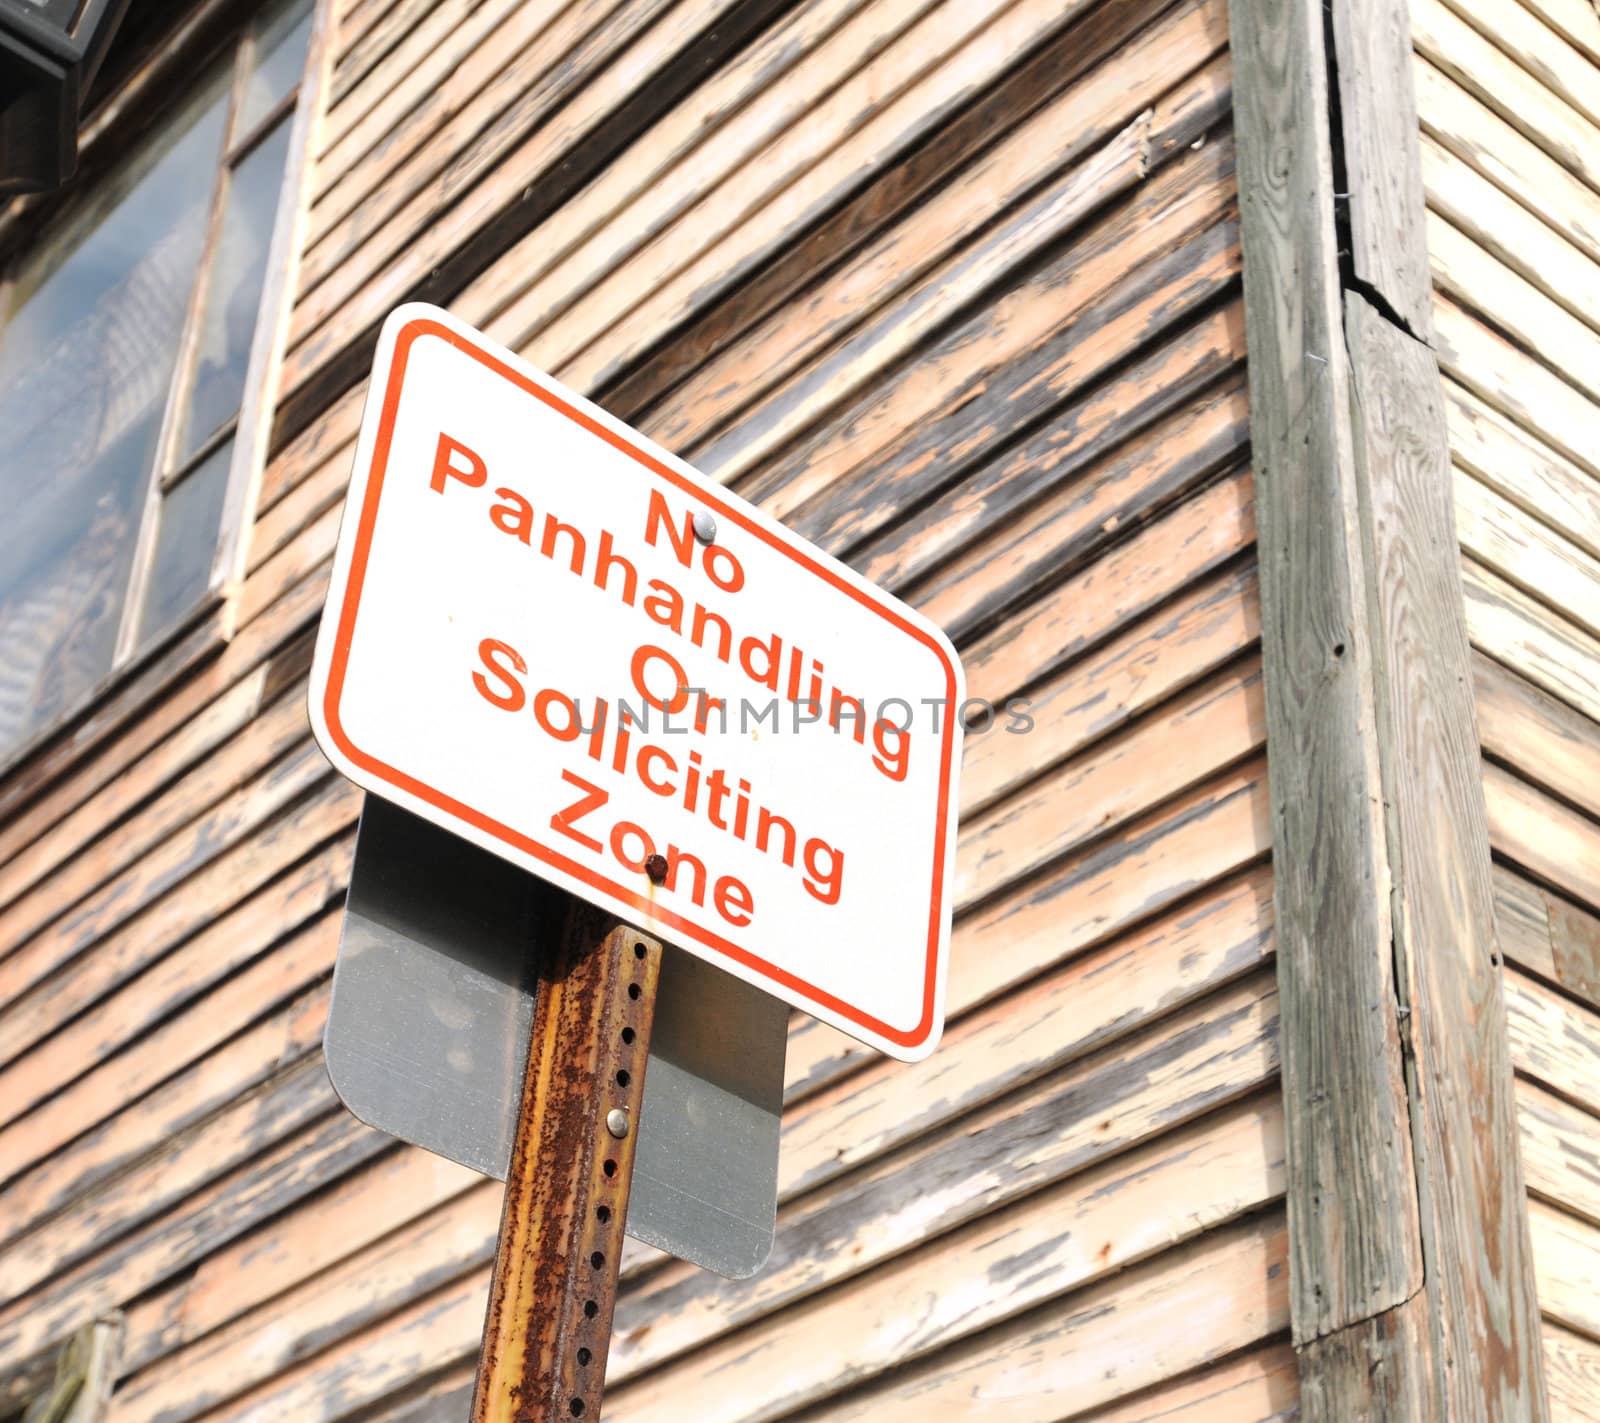 no panhandling or soliciting zone sign near wooden building